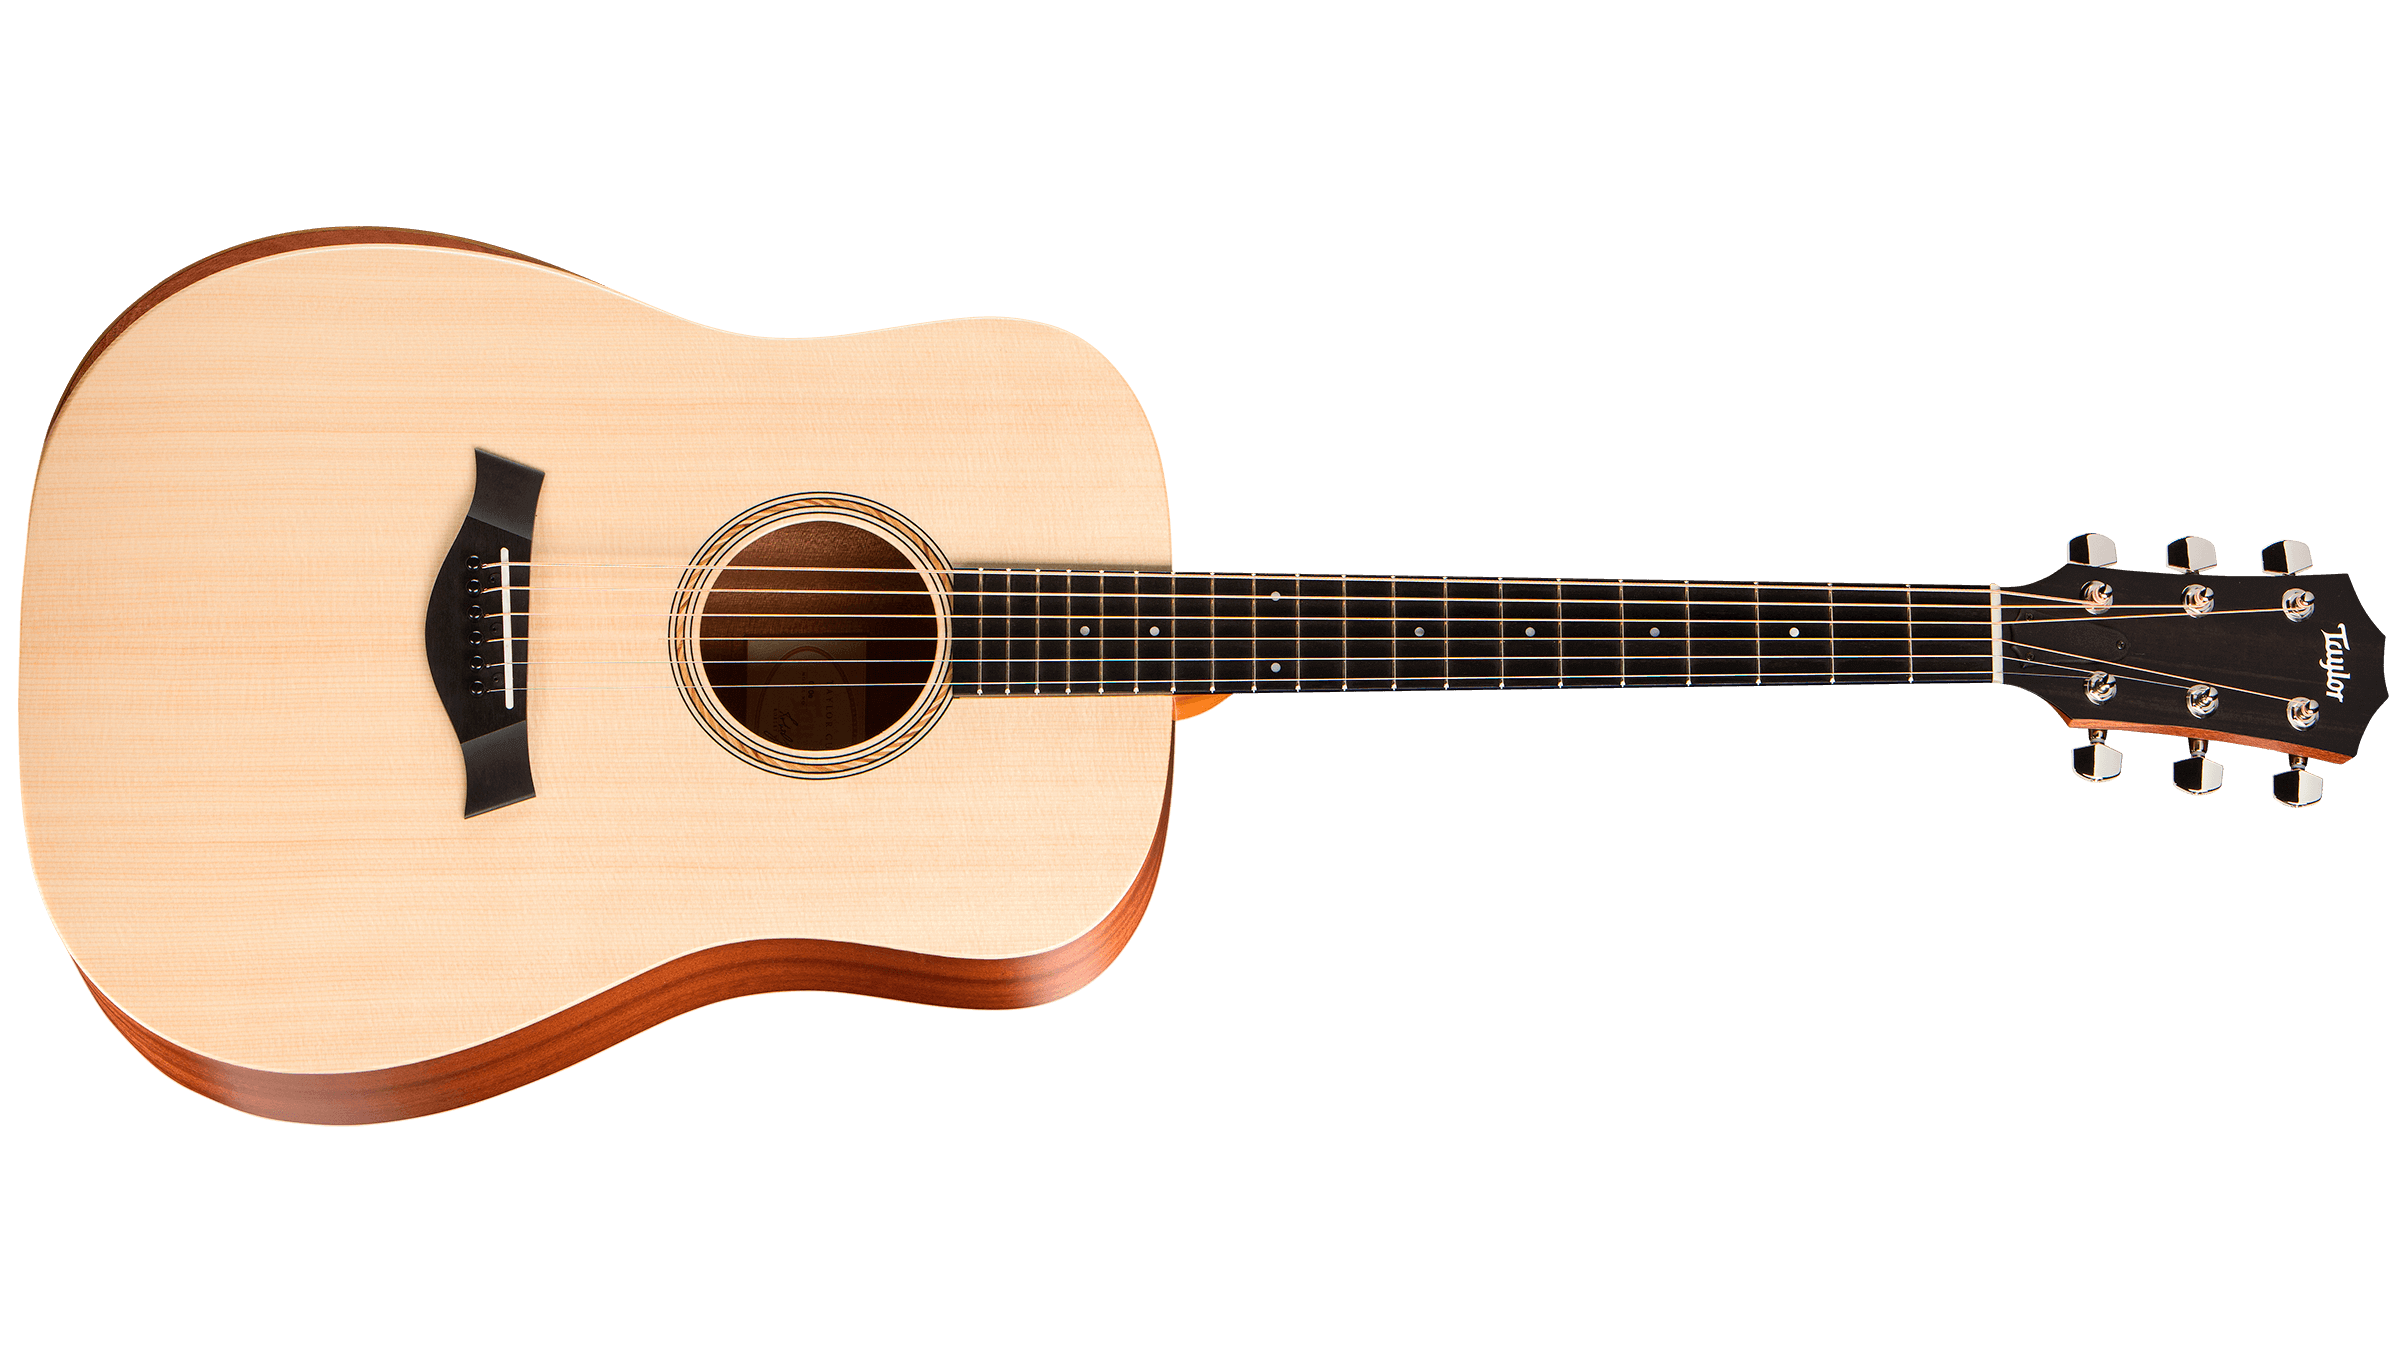 Taylor Academy 10e review